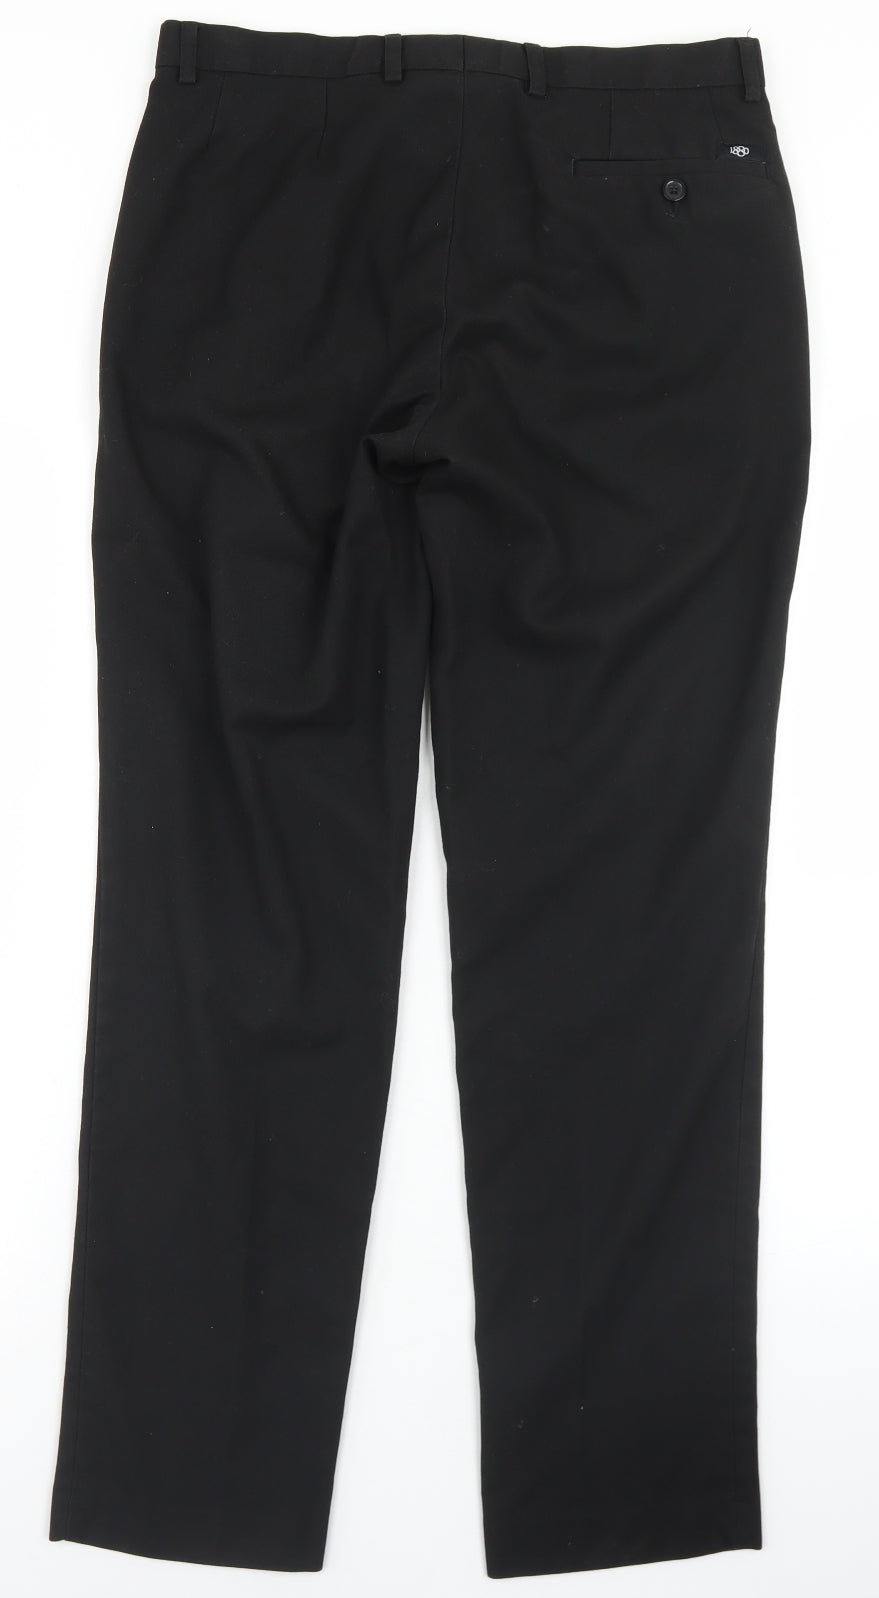 1880 Mens Black  Polyester Dress Pants Trousers Size 32 in L28 in Regular Button